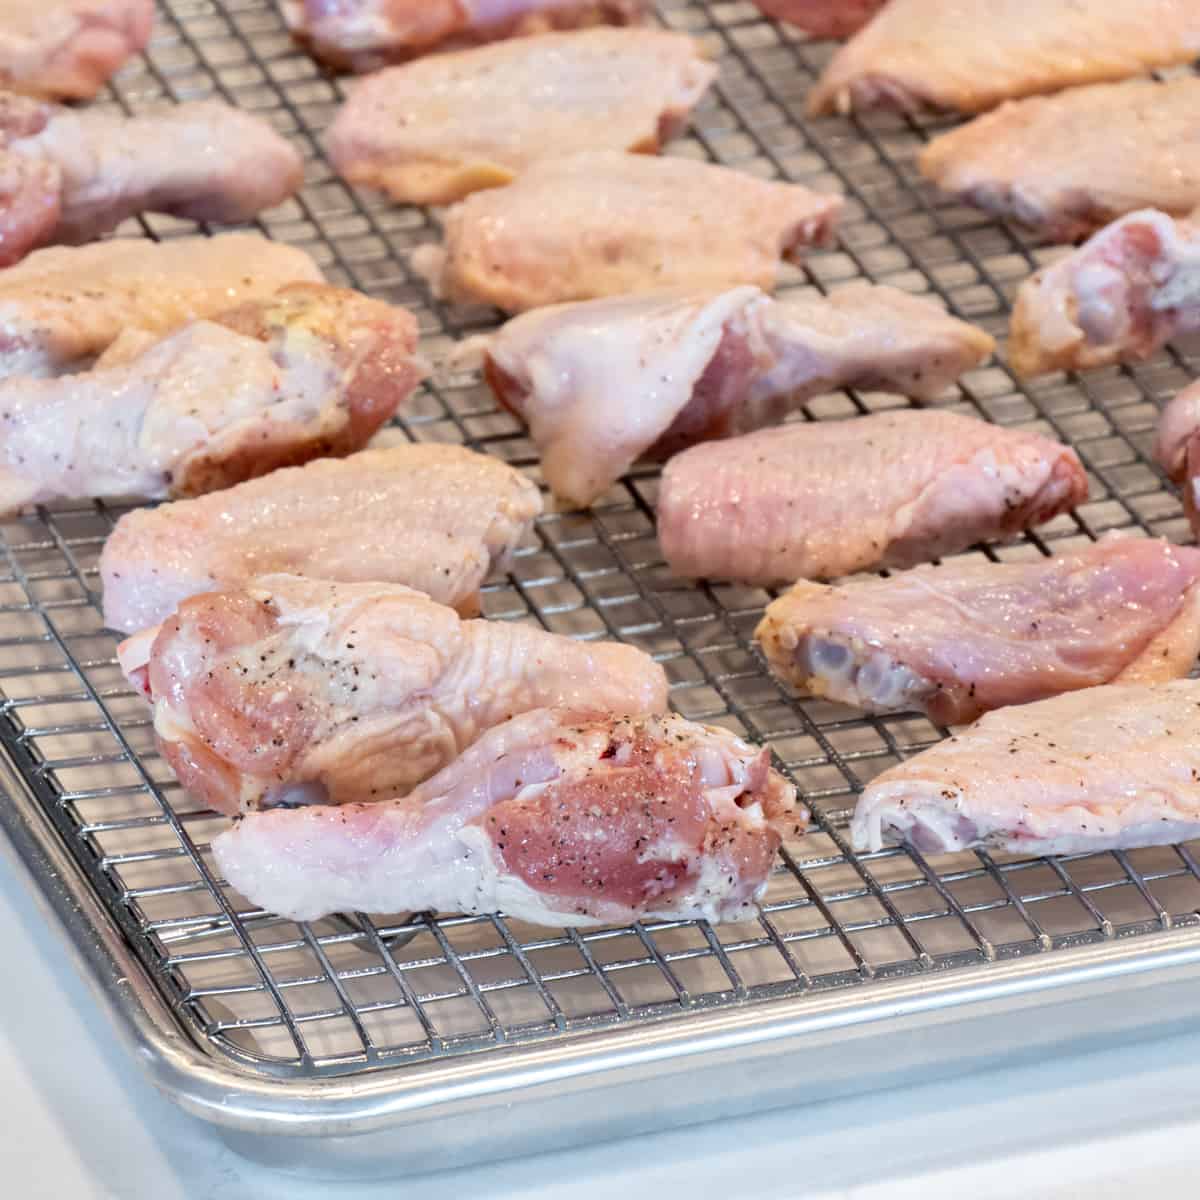 Raw chicken wings on a baking sheet and ready to go in the oven.